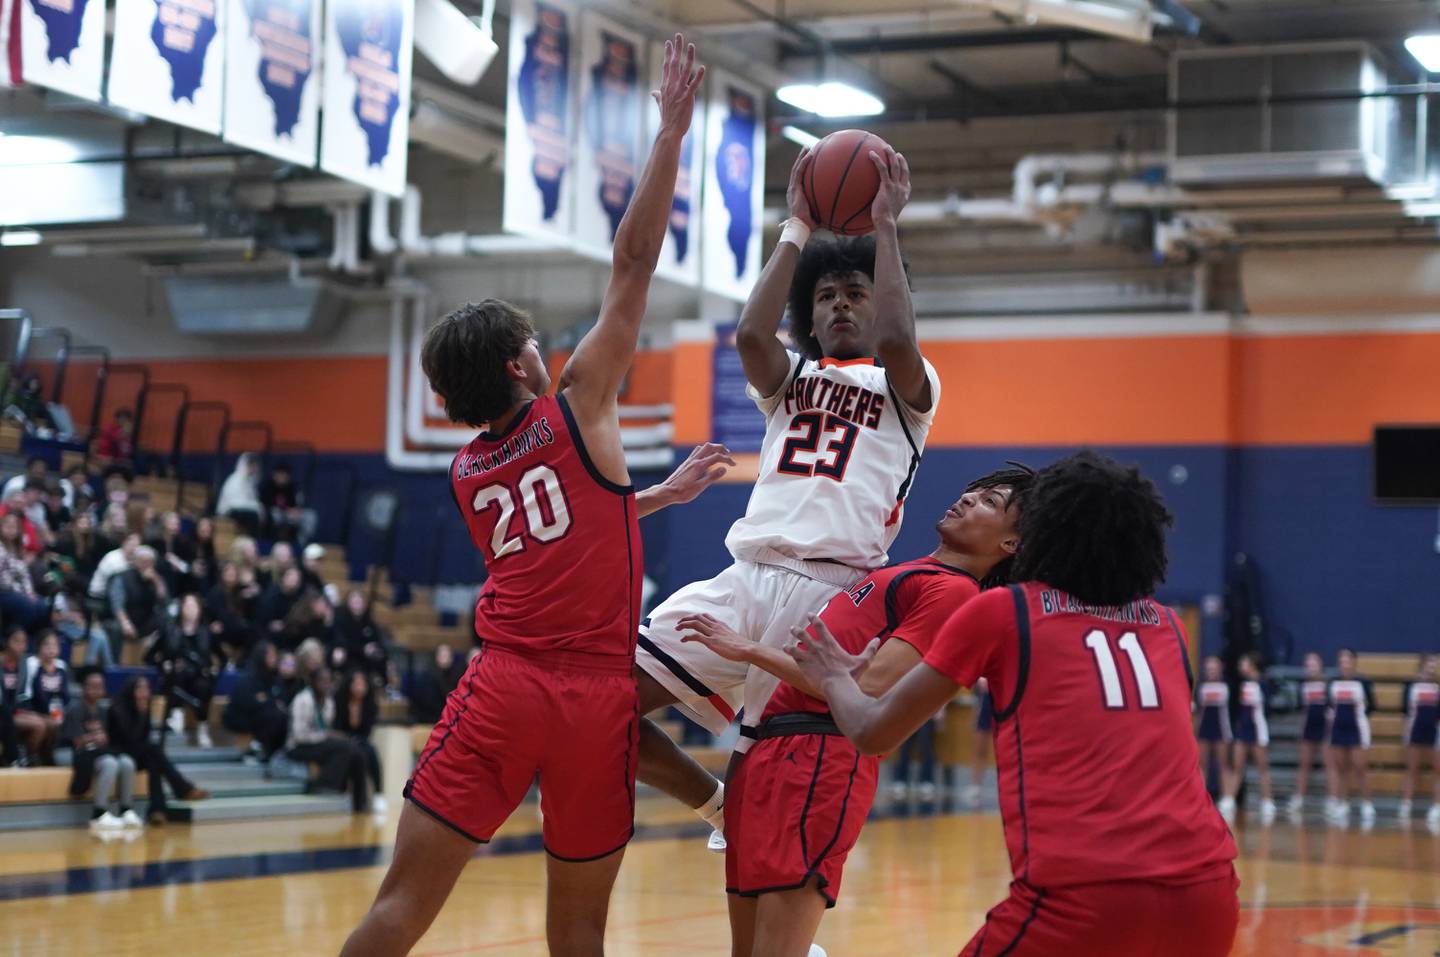 Oswego’s Dasean Patton (23) shoots the ball in the post against West Aurora's Billy Samp (20) and Terrence Smith (5) during a basketball game at Oswego High School on Friday, Dec 1, 2023.